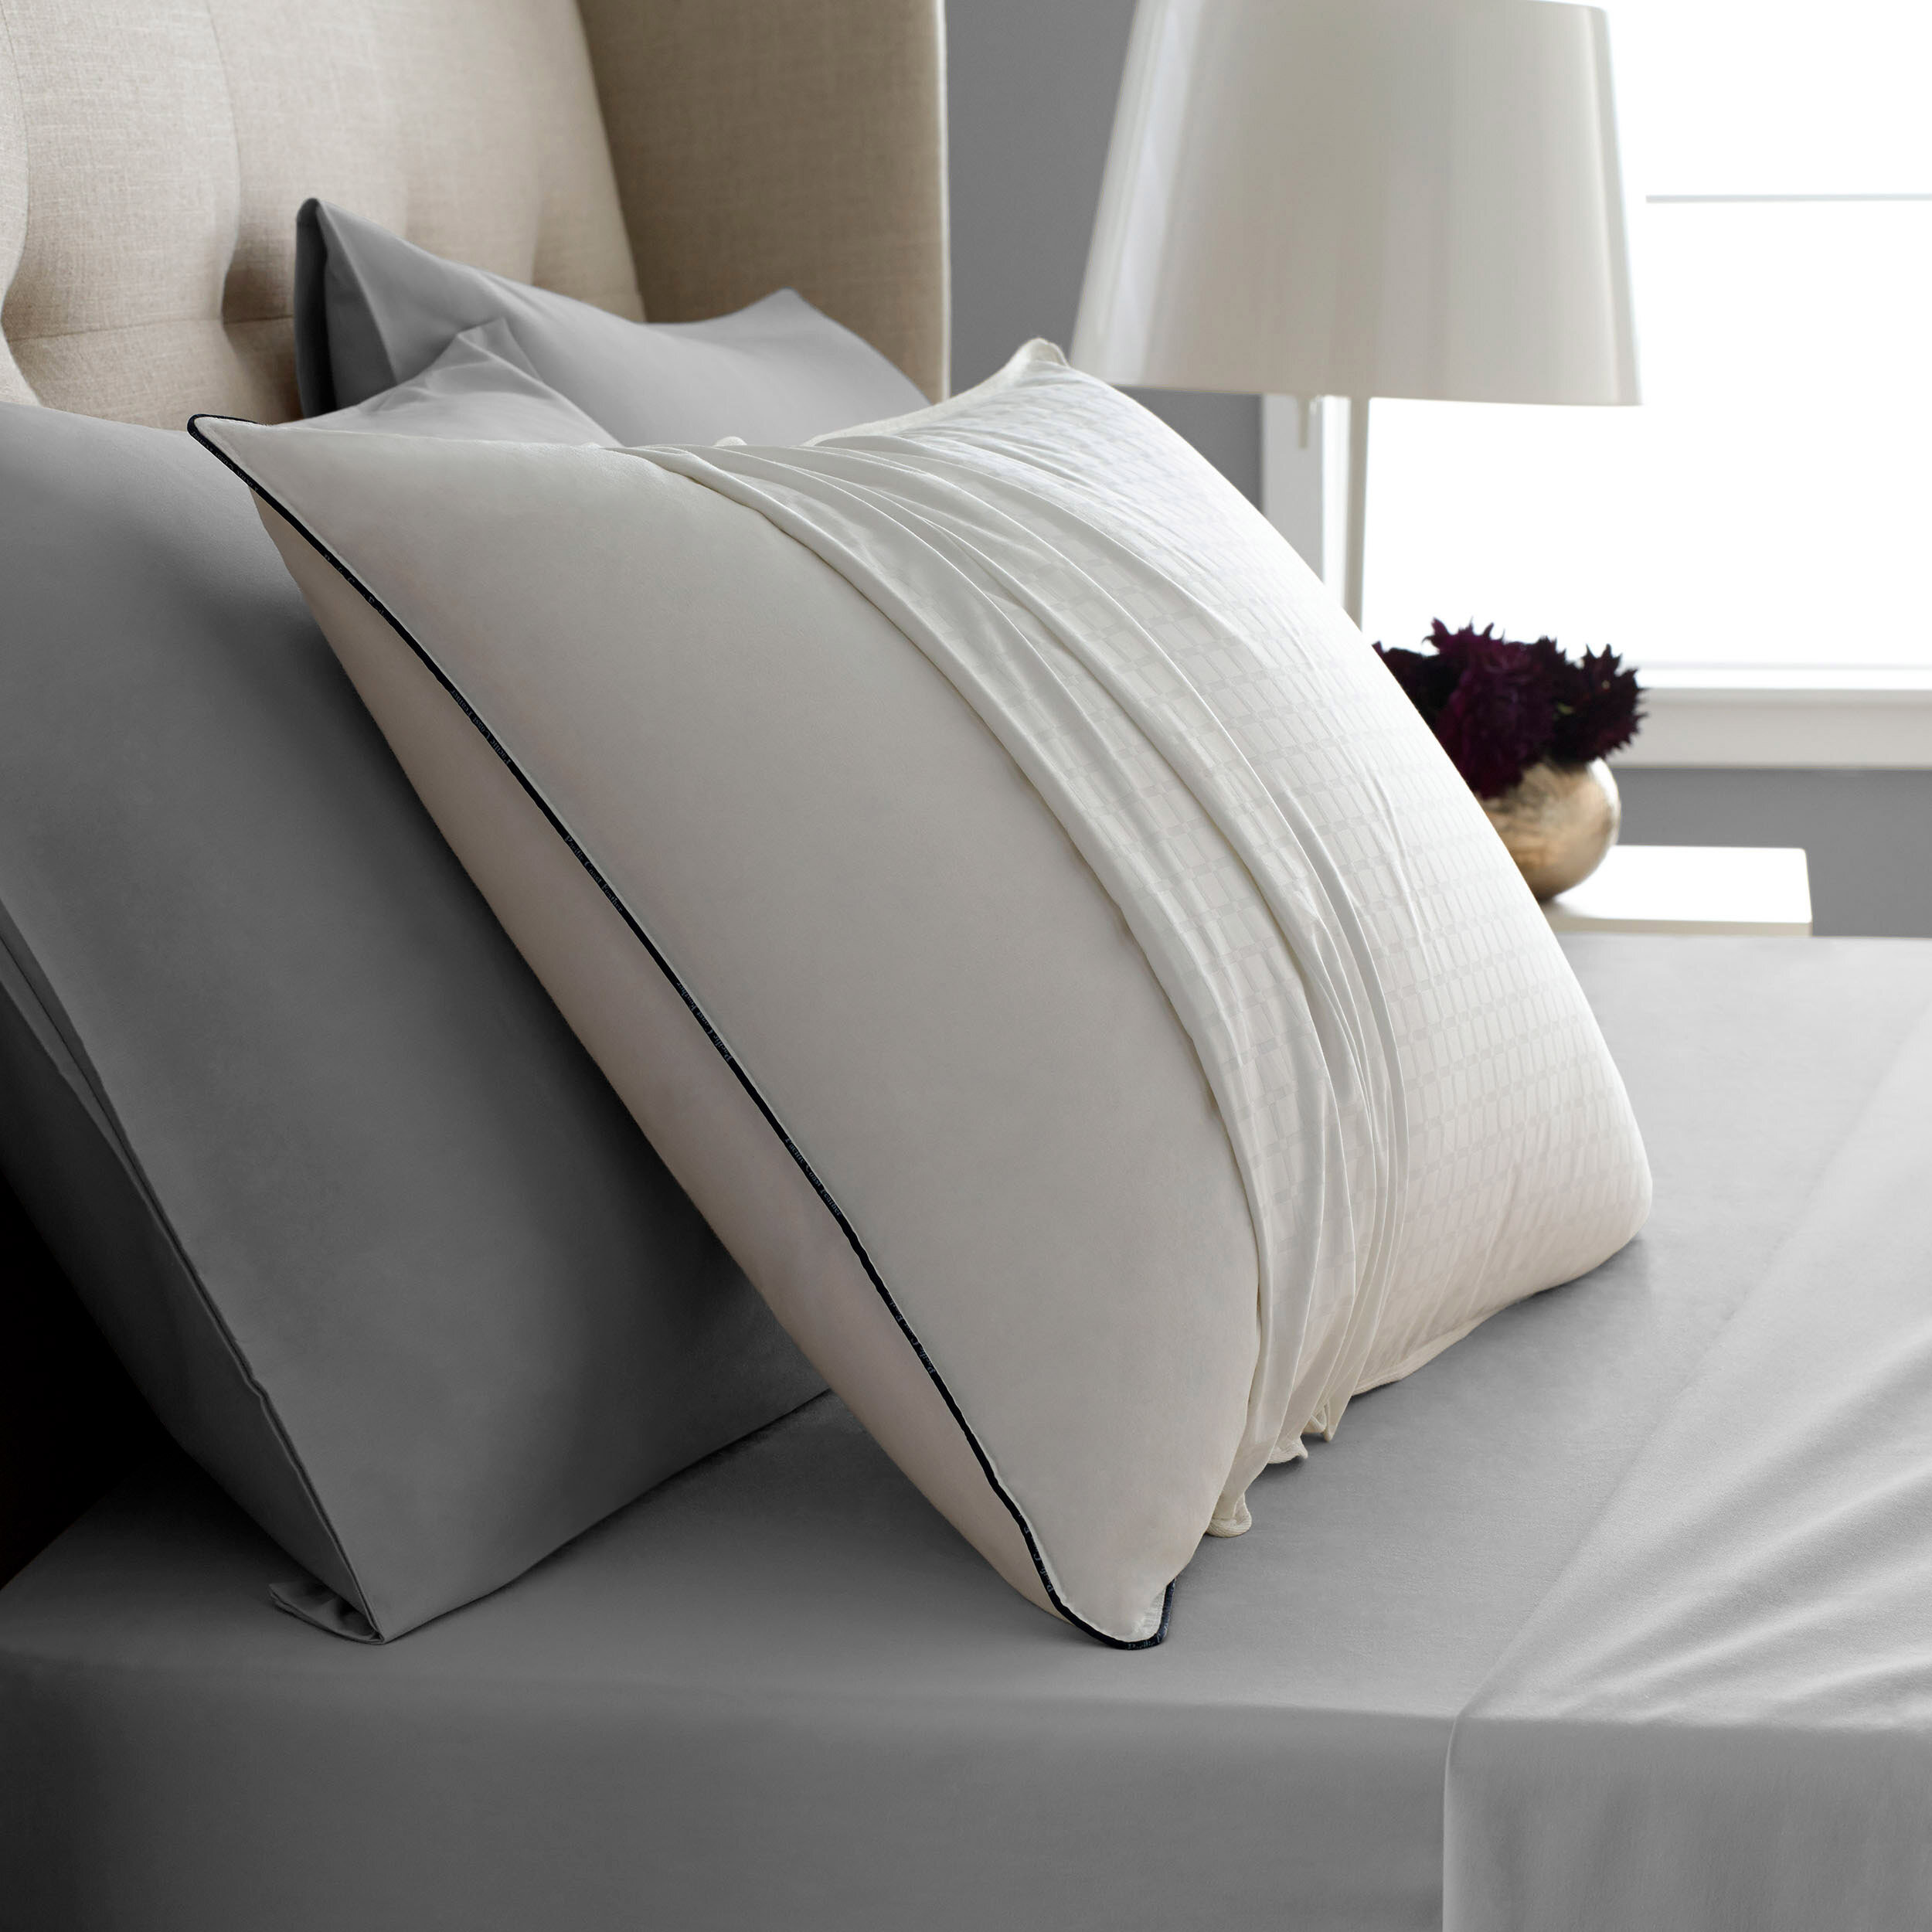 New Pacific Coast Feather White Bed Cover With Zip Closure